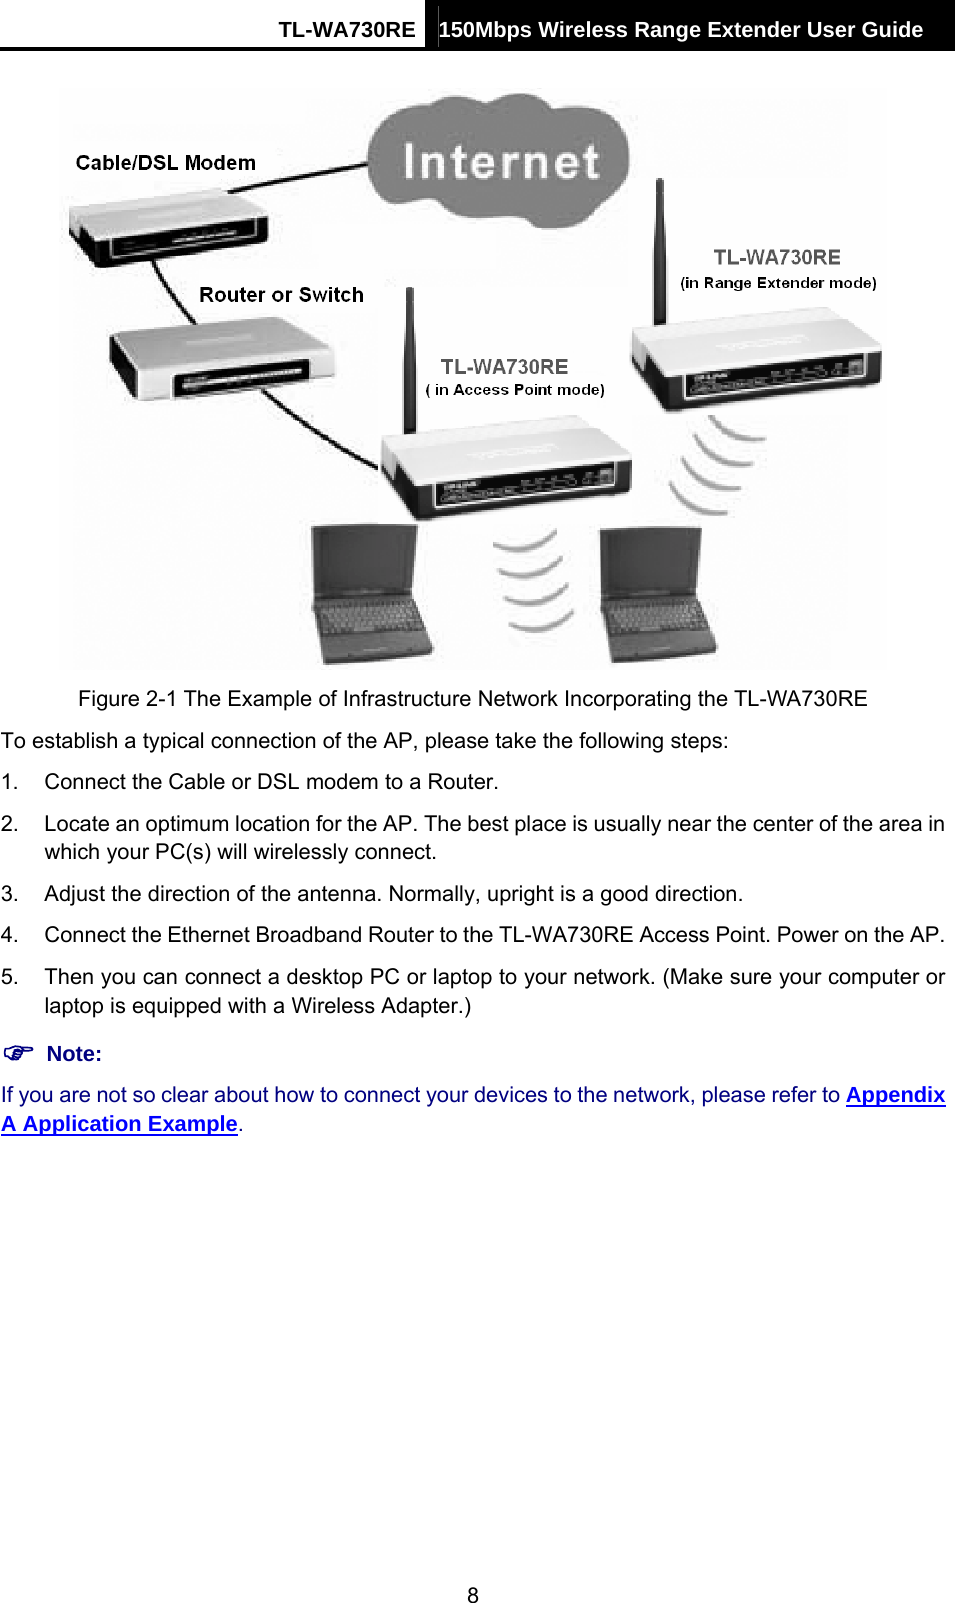 TL-WA730RE 150Mbps Wireless Range Extender User Guide   Figure 2-1 The Example of Infrastructure Network Incorporating the TL-WA730RE To establish a typical connection of the AP, please take the following steps: 1.  Connect the Cable or DSL modem to a Router. 2.  Locate an optimum location for the AP. The best place is usually near the center of the area in which your PC(s) will wirelessly connect. 3.  Adjust the direction of the antenna. Normally, upright is a good direction. 4.  Connect the Ethernet Broadband Router to the TL-WA730RE Access Point. Power on the AP. 5.  Then you can connect a desktop PC or laptop to your network. (Make sure your computer or laptop is equipped with a Wireless Adapter.) ) Note: If you are not so clear about how to connect your devices to the network, please refer to Appendix A Application Example.  8 